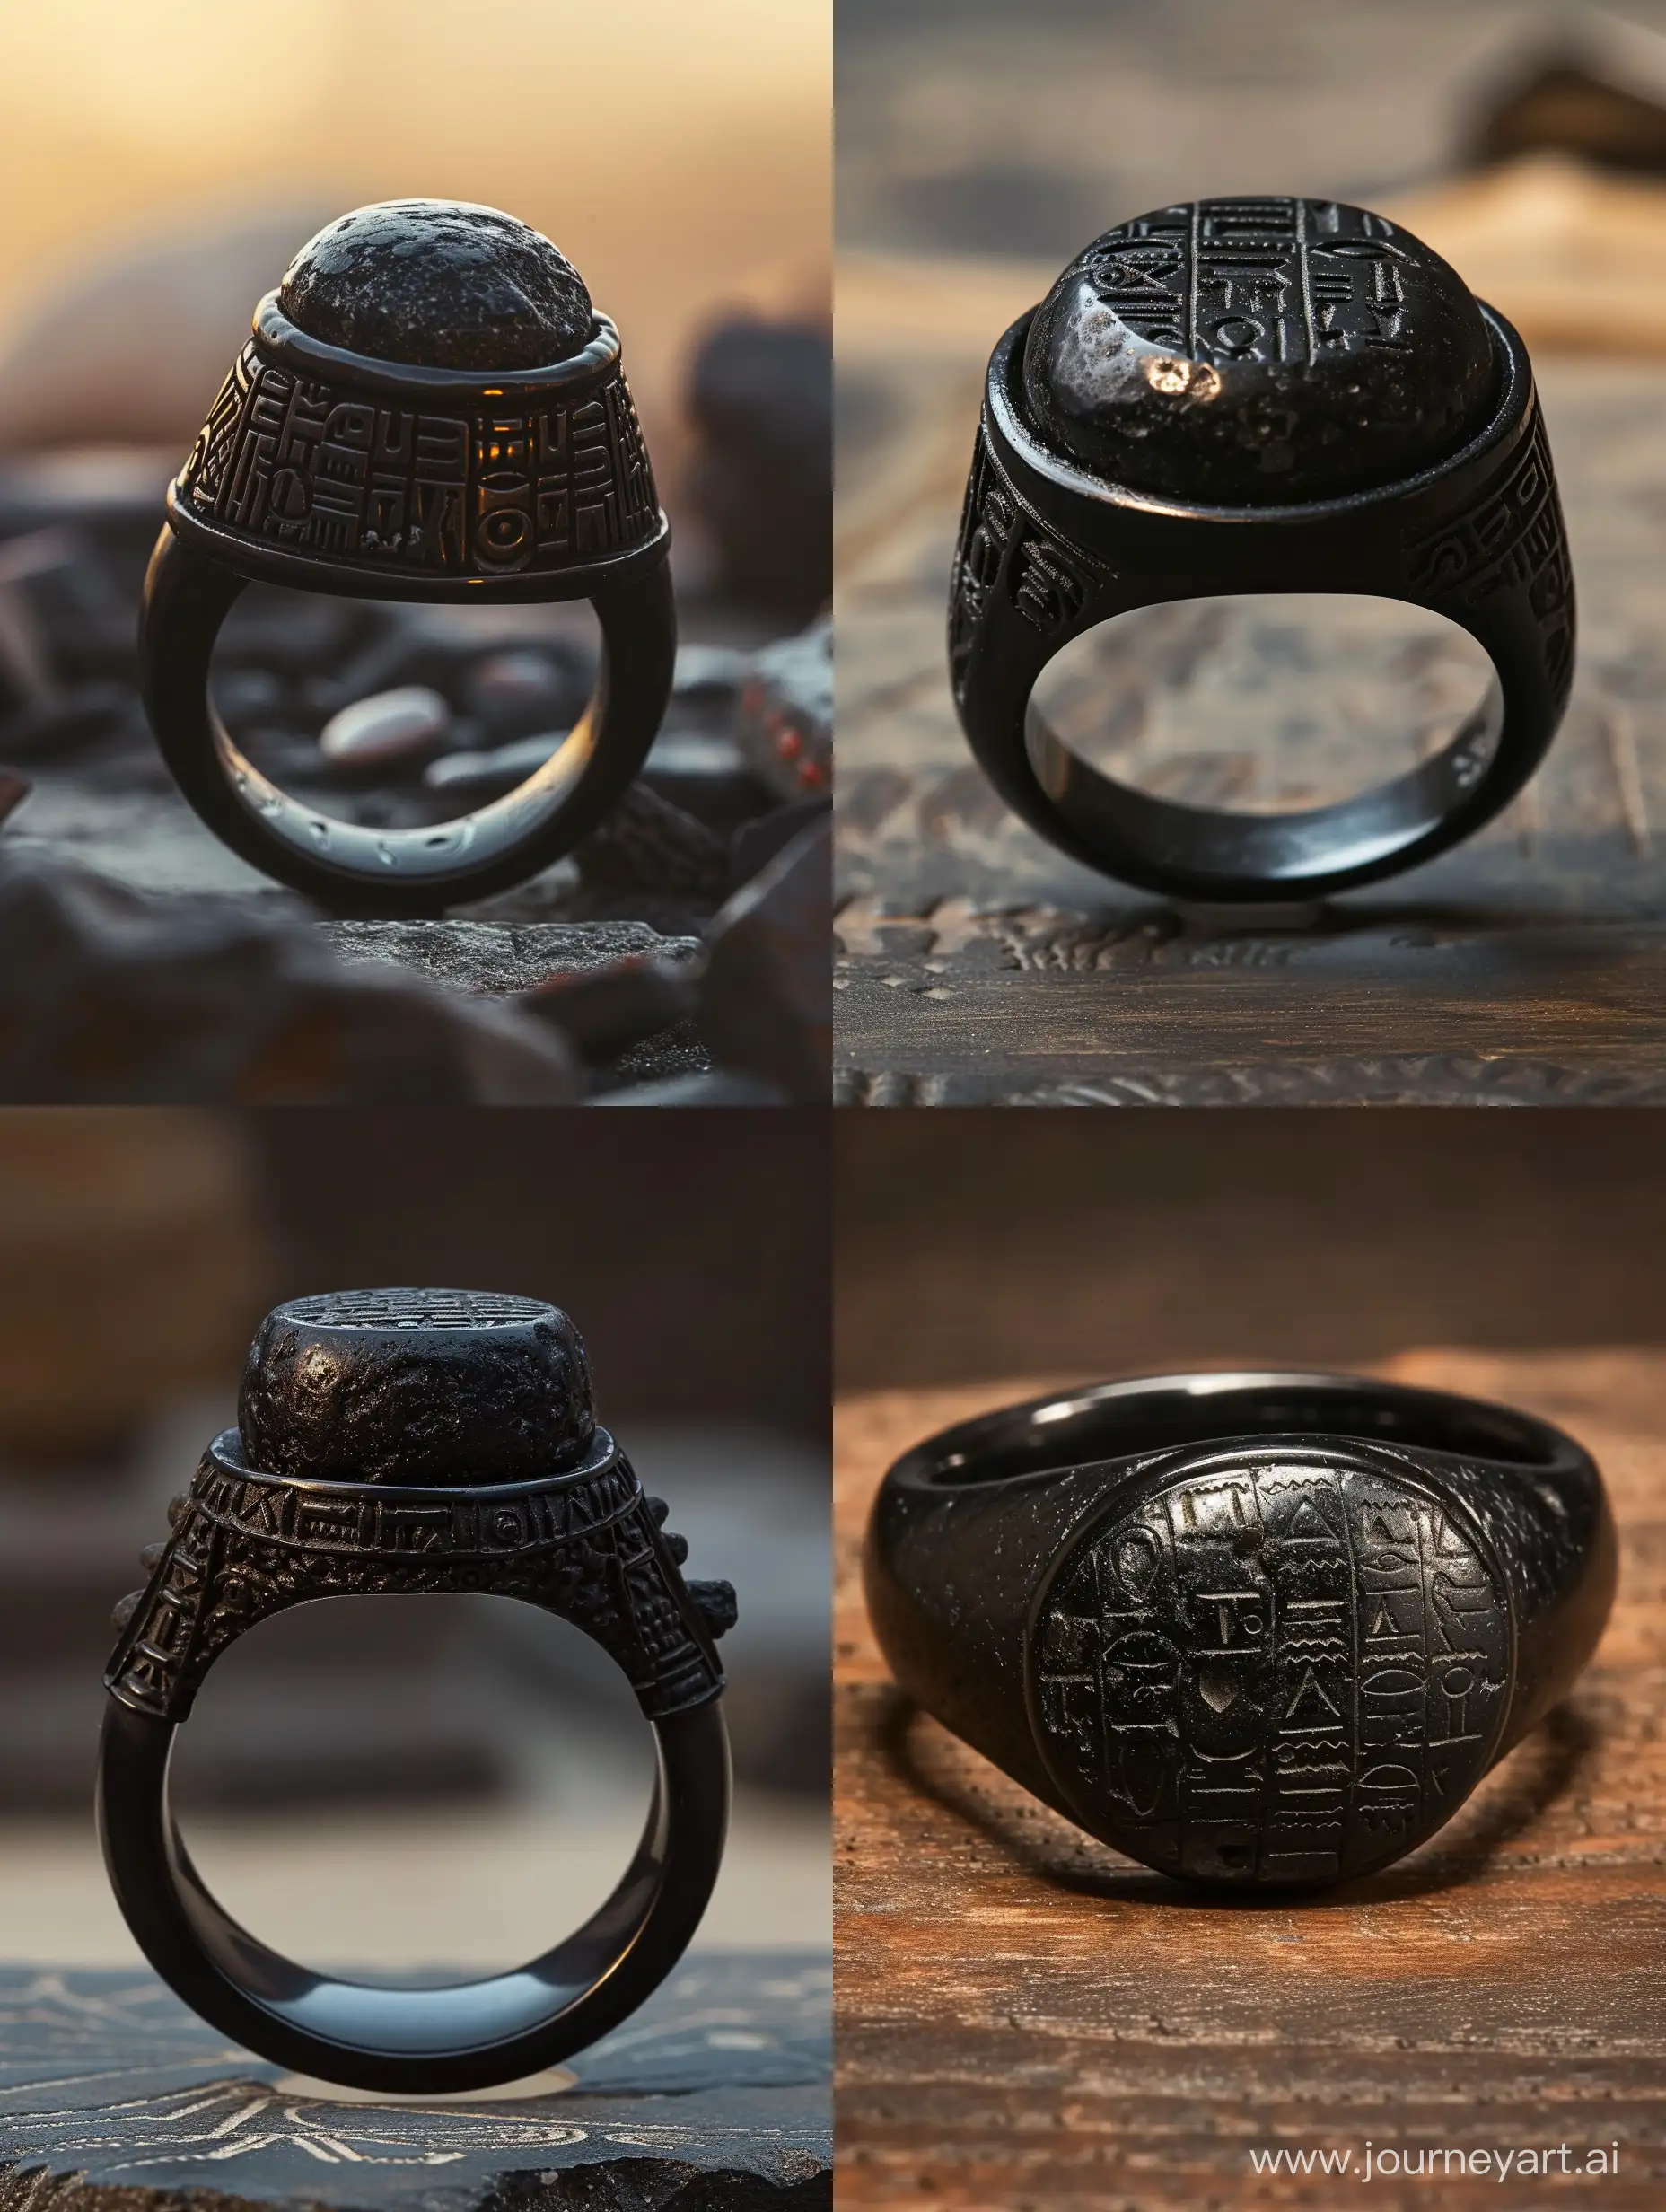 Historic-Black-Ring-with-Intricate-Carvings-and-Cuneiform-Letters